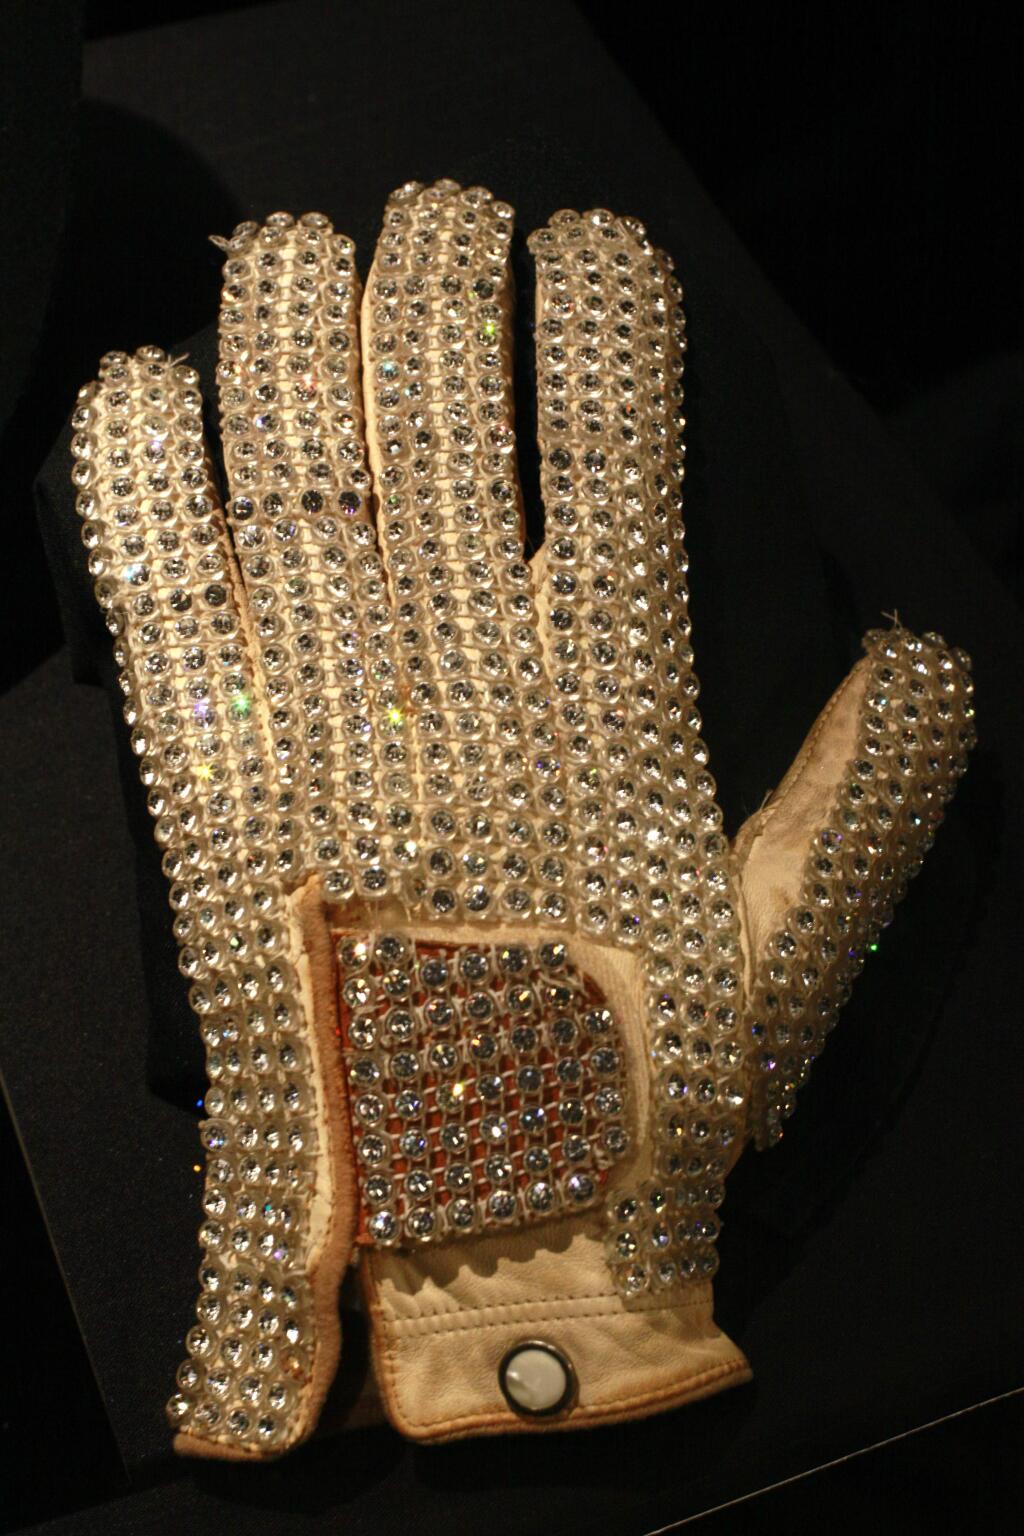 FILE - In this Nov. 21, 2009, file photo, Michael Jackson's glove from his 1983 performance of Billie Jean at the Motown 25 television special where he performed the Moonwalk for the first time is on display at the Hard Rock Cafe in New York's Times Square. Julien's Auctions announced on Oct. 13, 2017, that a white glove Jackson wore on his 'Triumph' tour is among several Jackson memorabilia items set to go up for bid on Nov. 4. (AP Photo/Mary Altaffer, File)